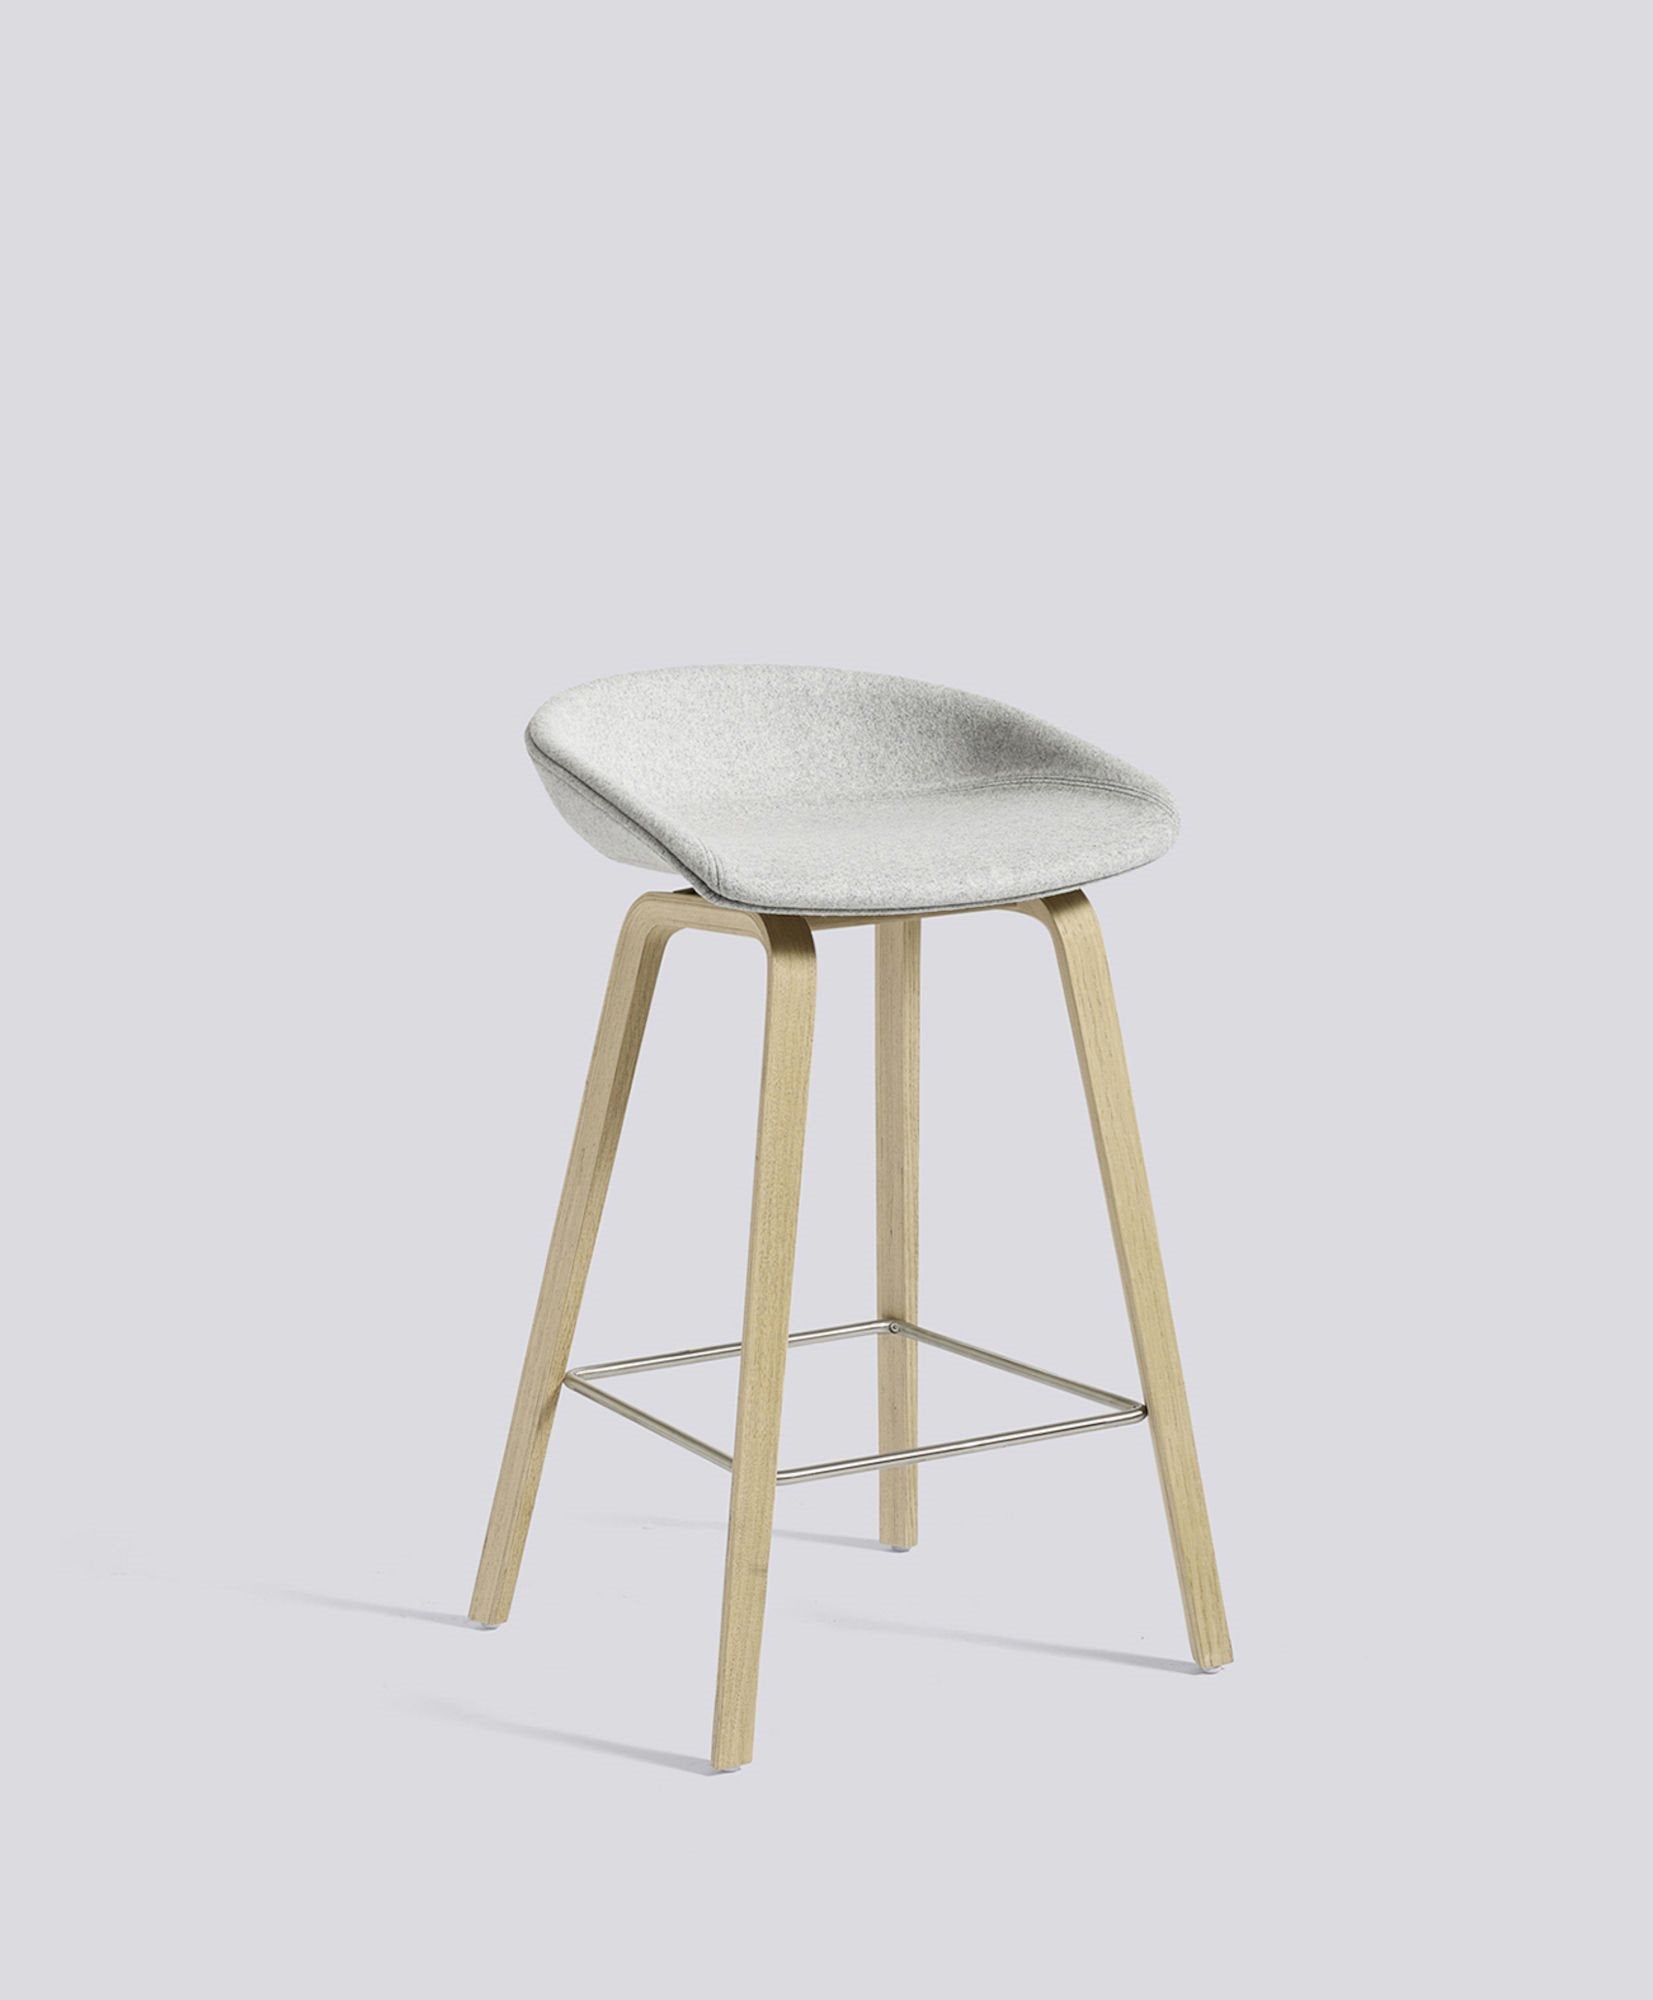 About A Stool AAS33 64cm-Full Upholstery